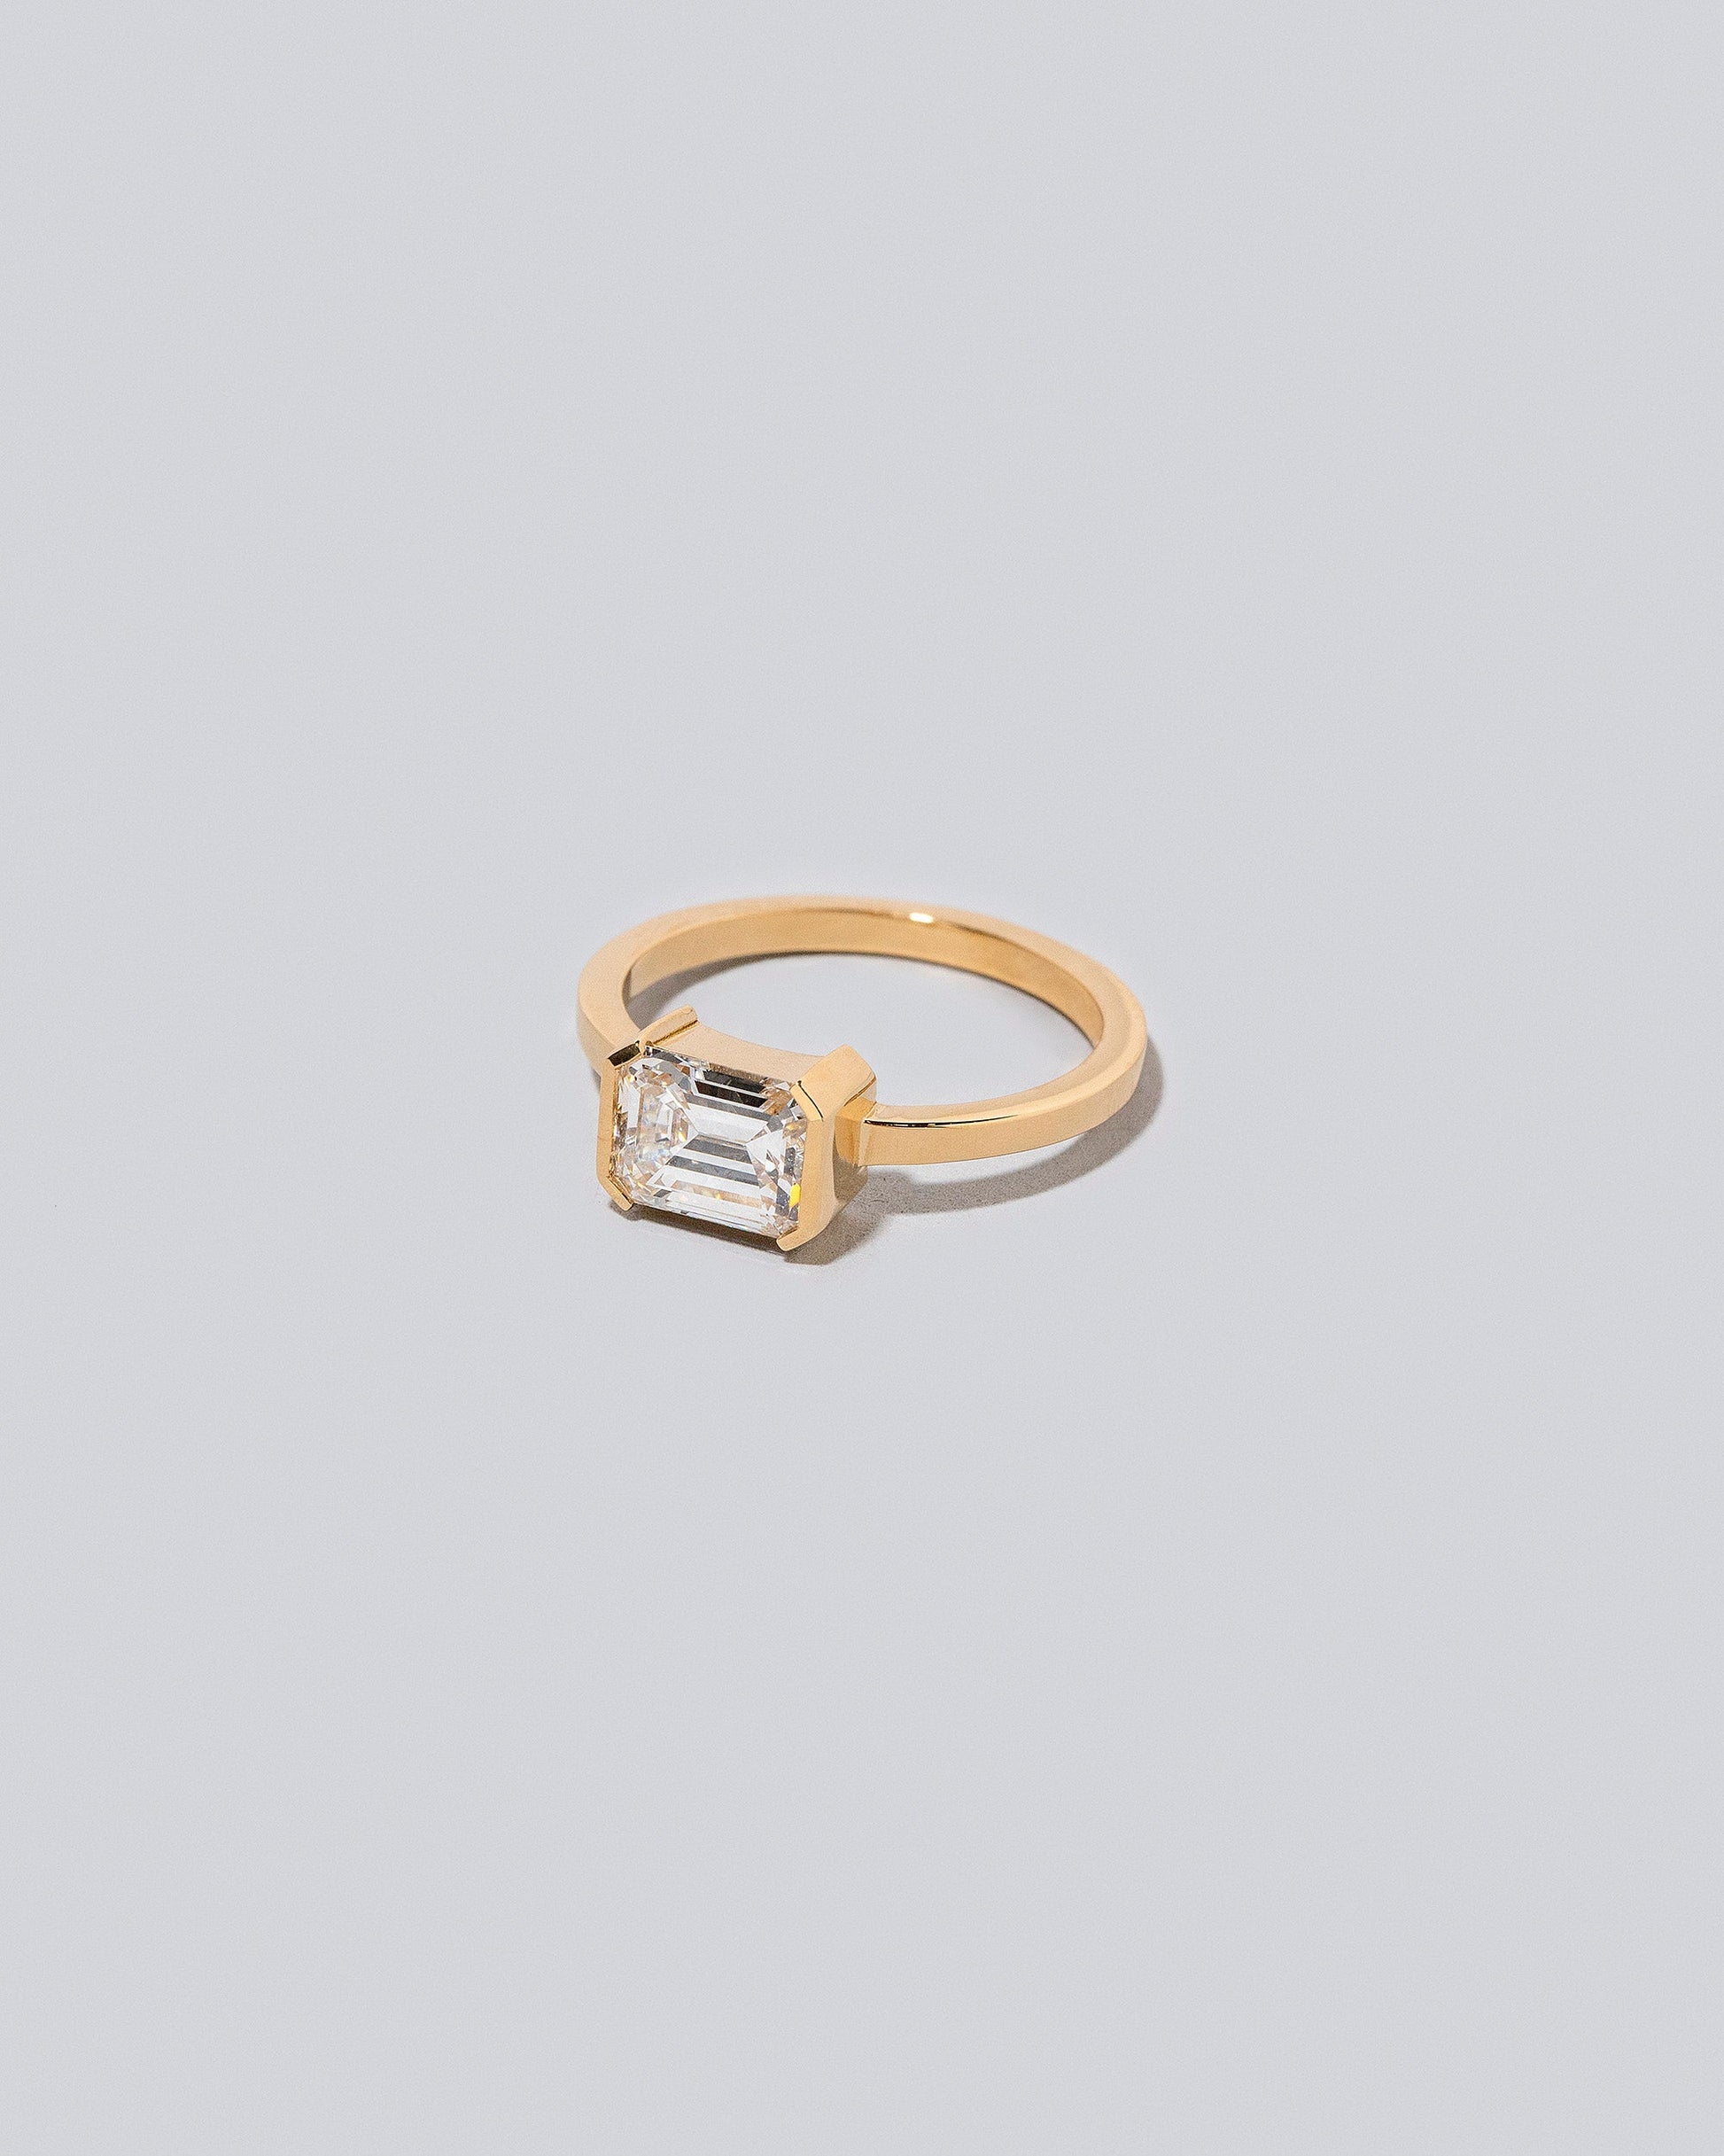 Manor Ring on light colored background.